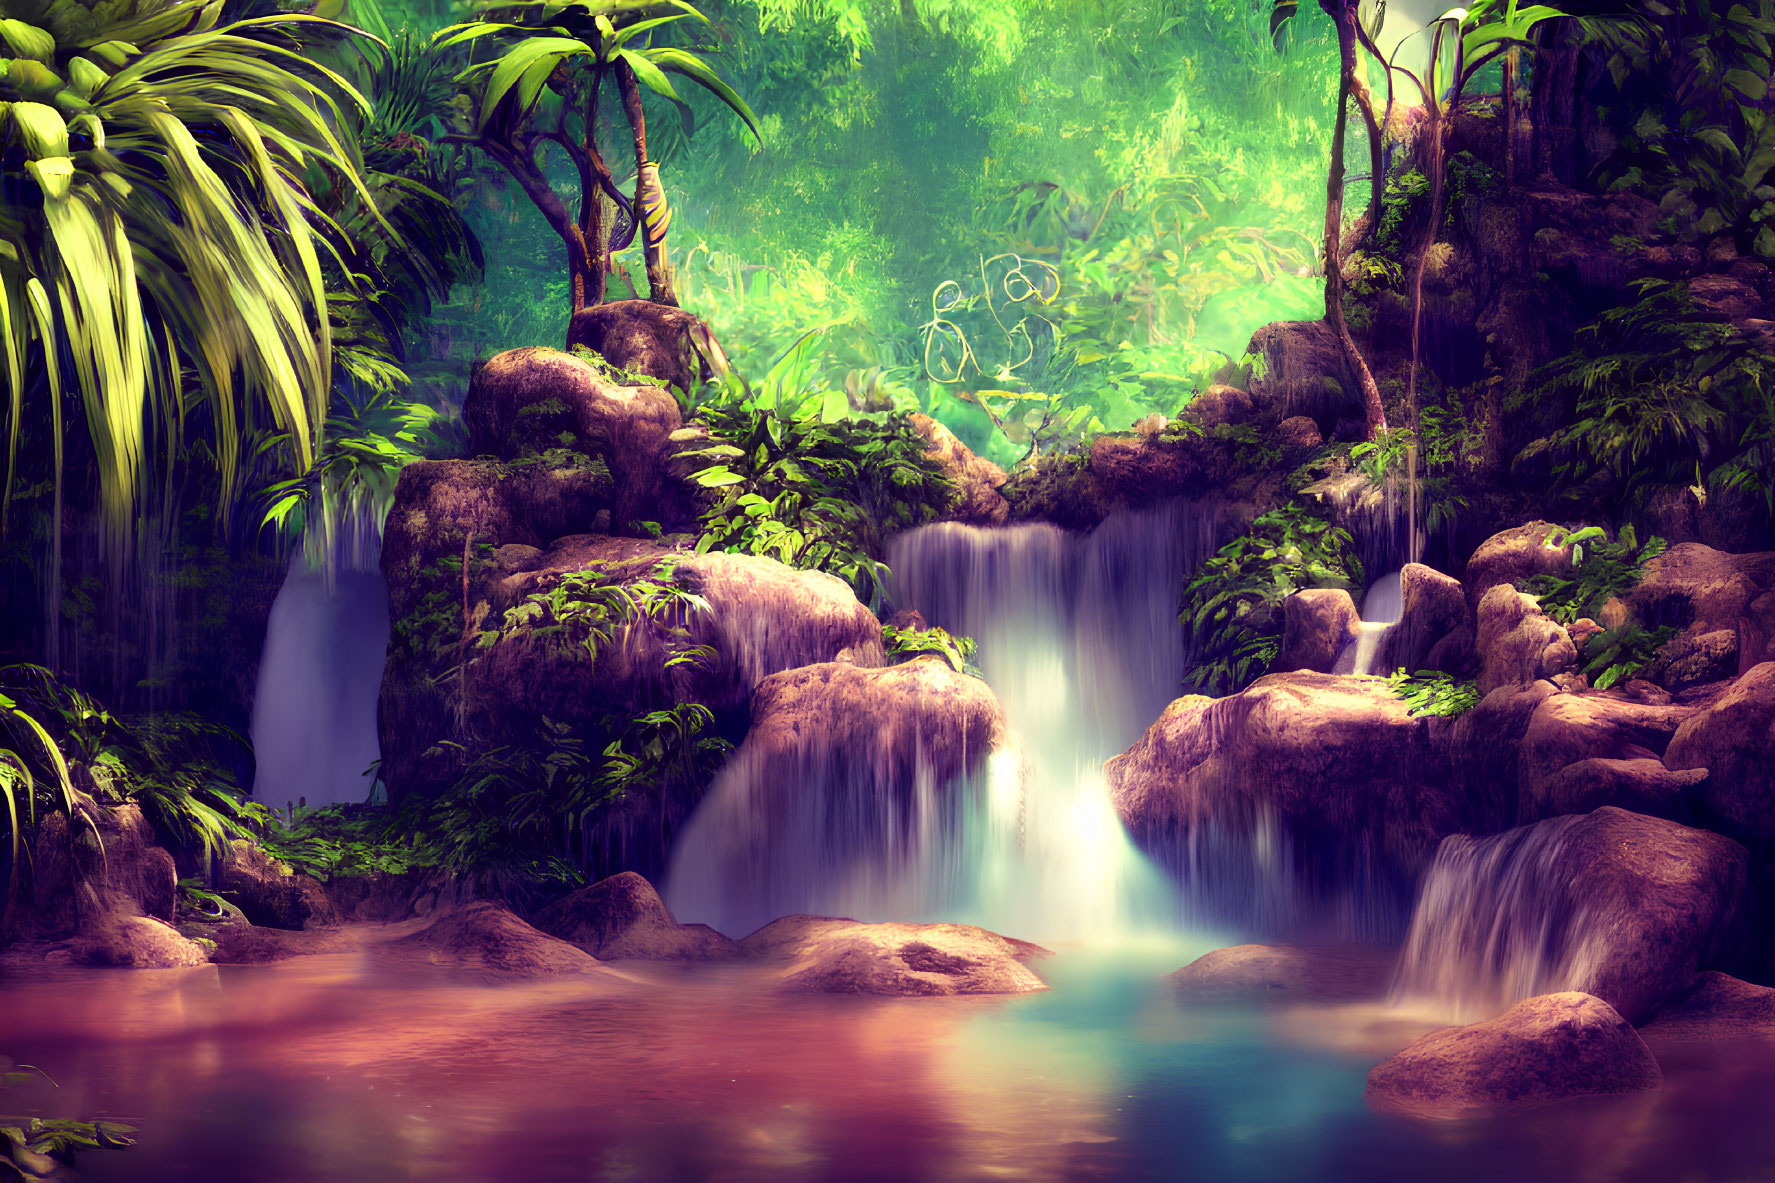 Tranquil Tropical Waterfall with Moss-Covered Rocks